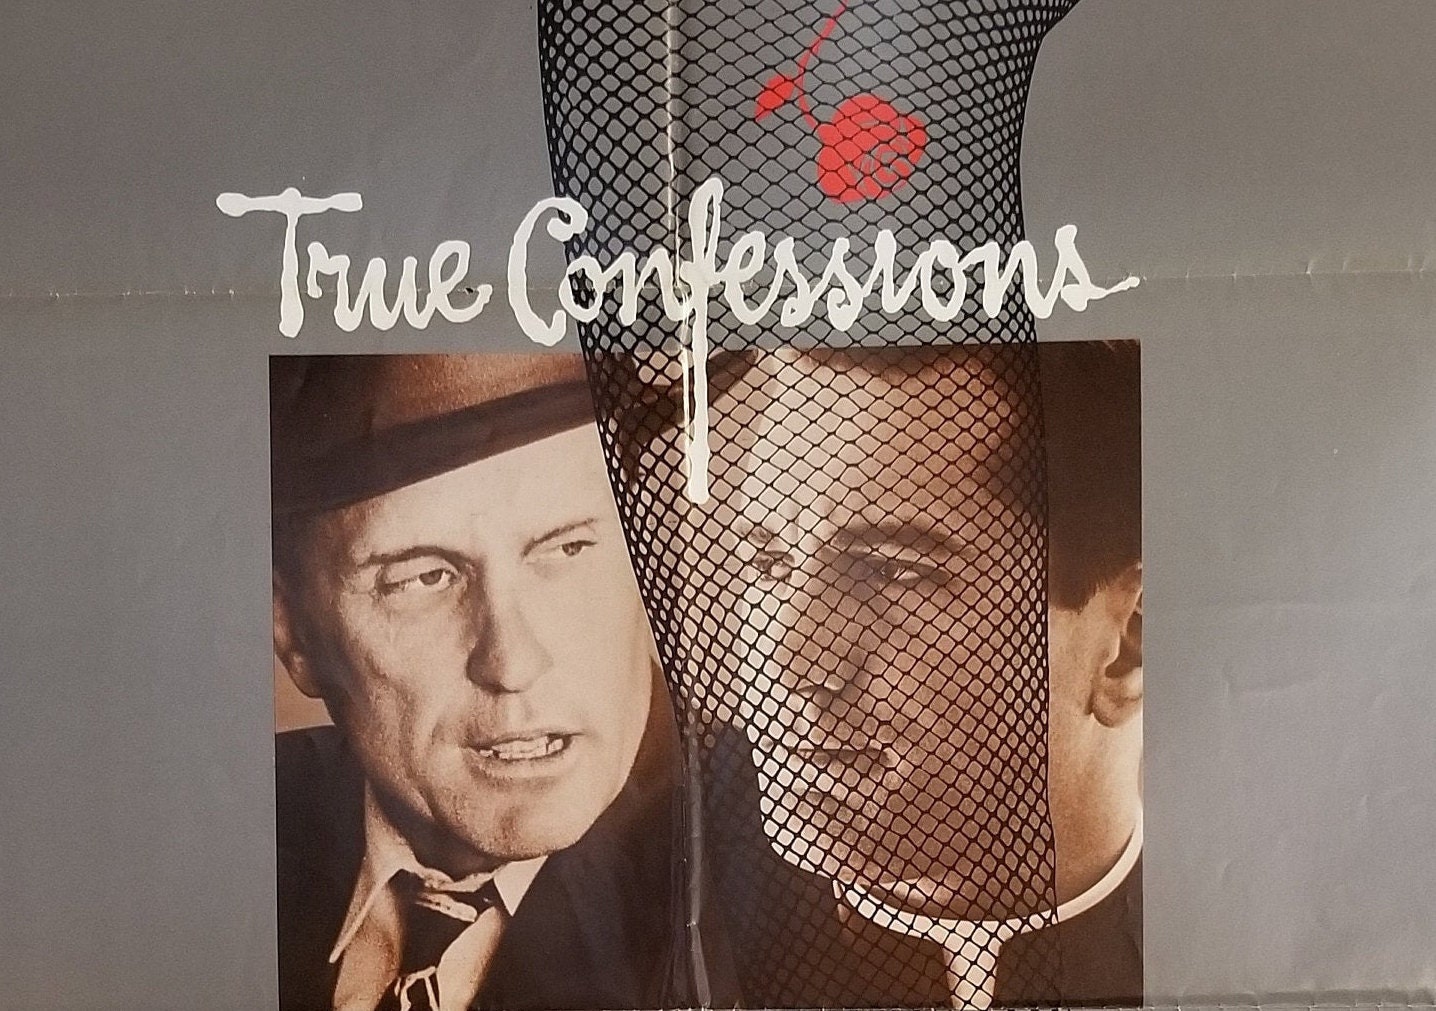 True Confessions-Original Vintage Movie Poster of Ulu Grosbards story of Sex, Money and the Church with Robert De Niro and Robert Duvall